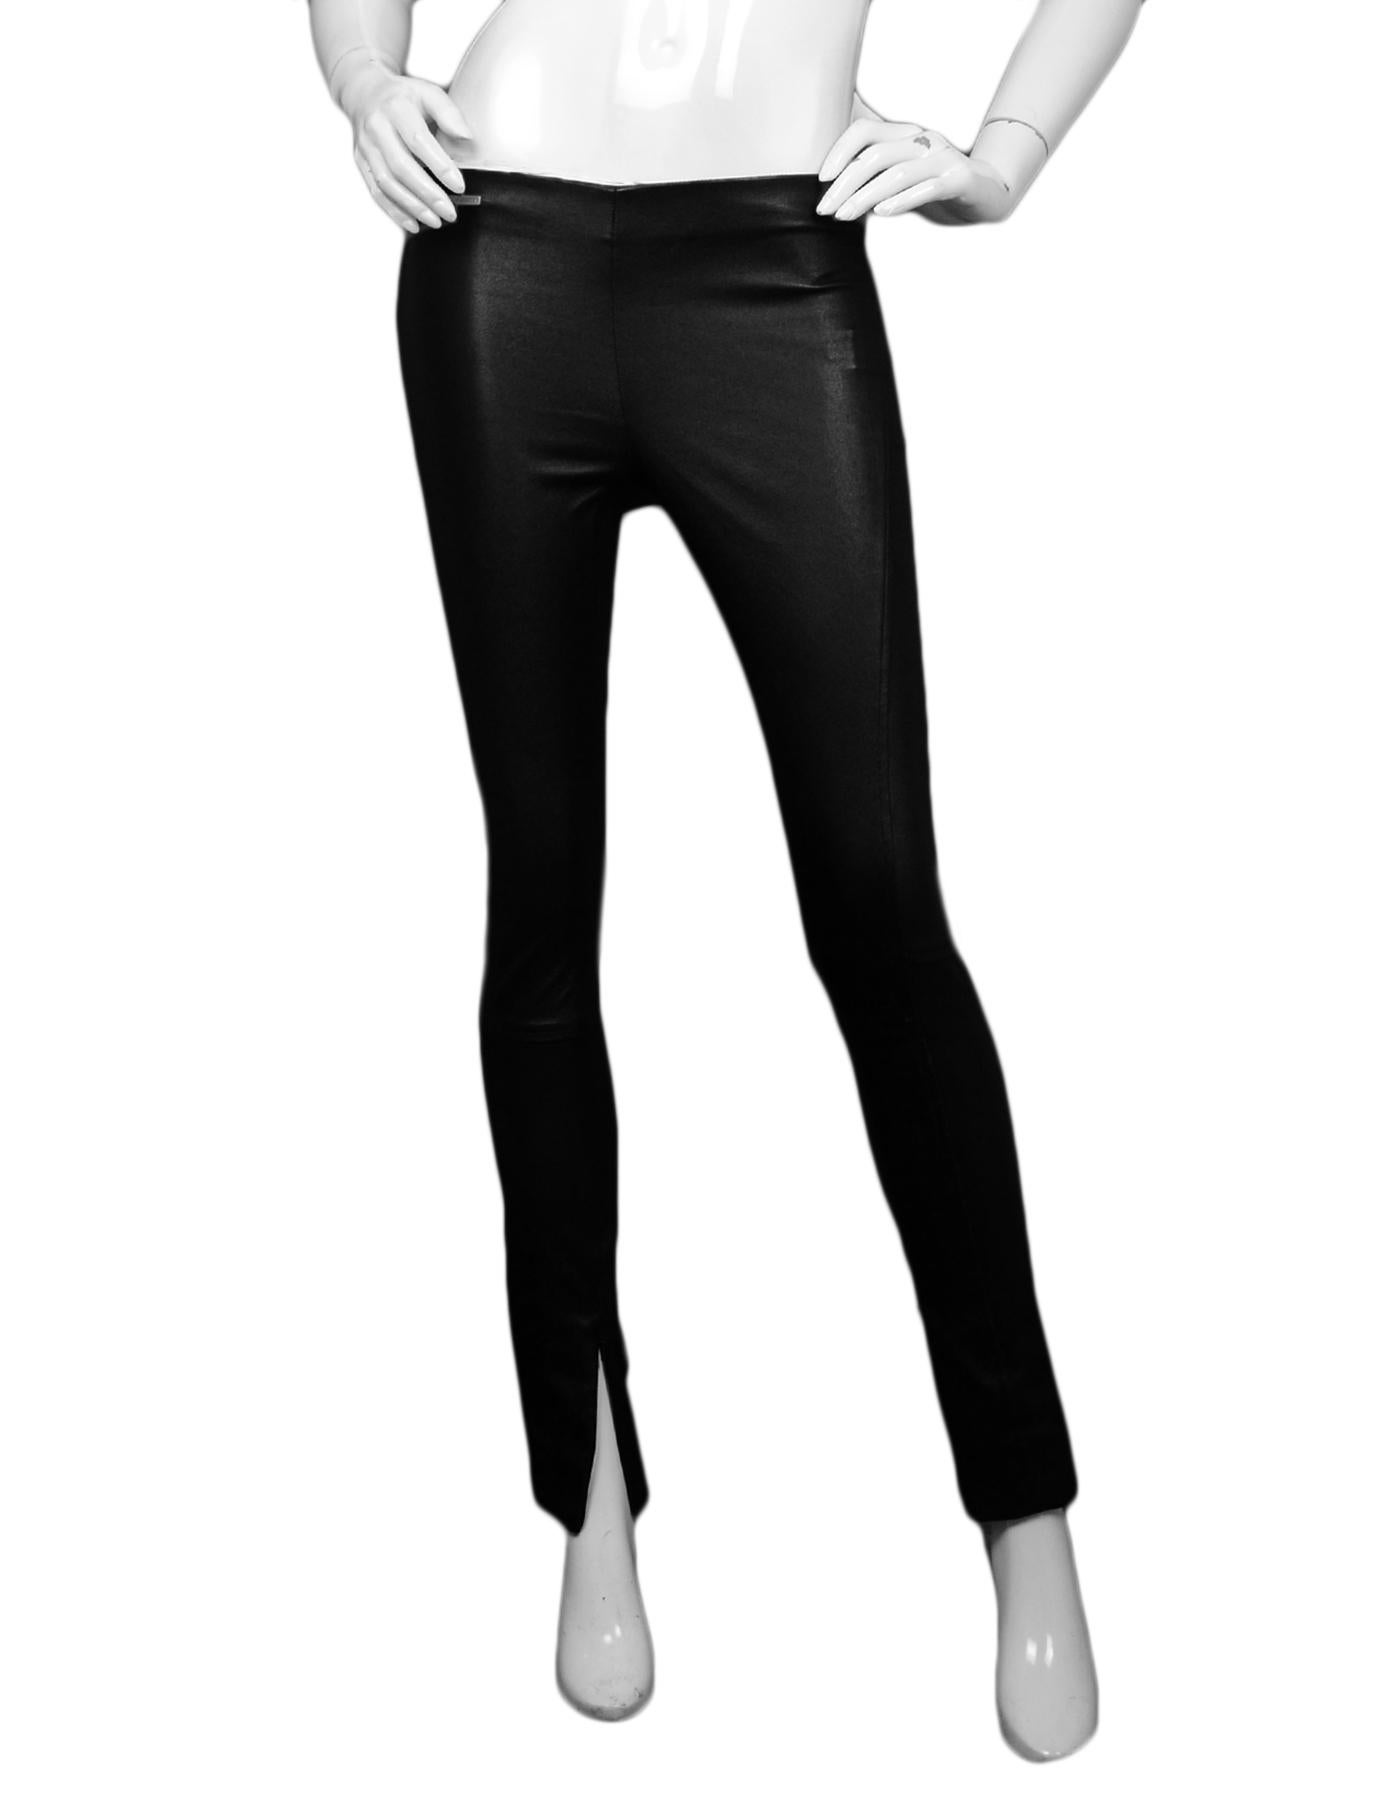 Polo by Ralph Lauren Black Leather Leggings sz XS

Made In: China
Color: Black
Materials: 100% Lamb Leather
Lining: 98% Cotton, 2% Elastane
Opening/Closure: Slip on
Overall Condition: Excellent pre-owned condition
Estimated Retail: $998 + tax

Tag